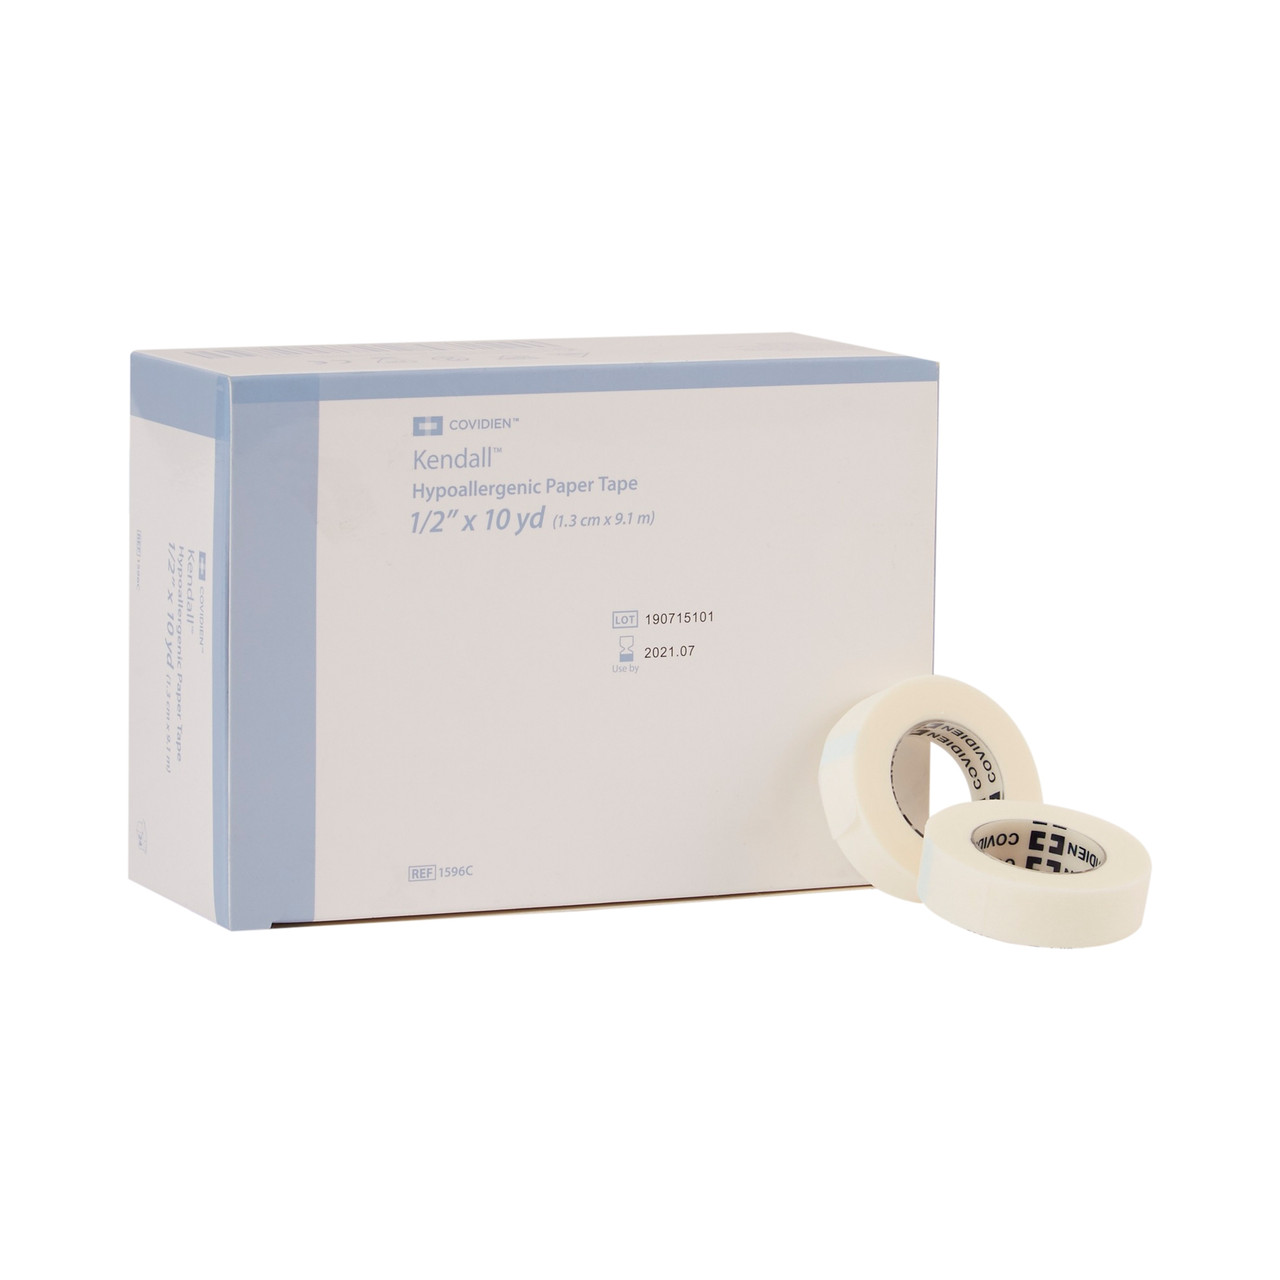 Covidien Kendall Hypoallergenic Paper Tape - Medical Paper Tapes